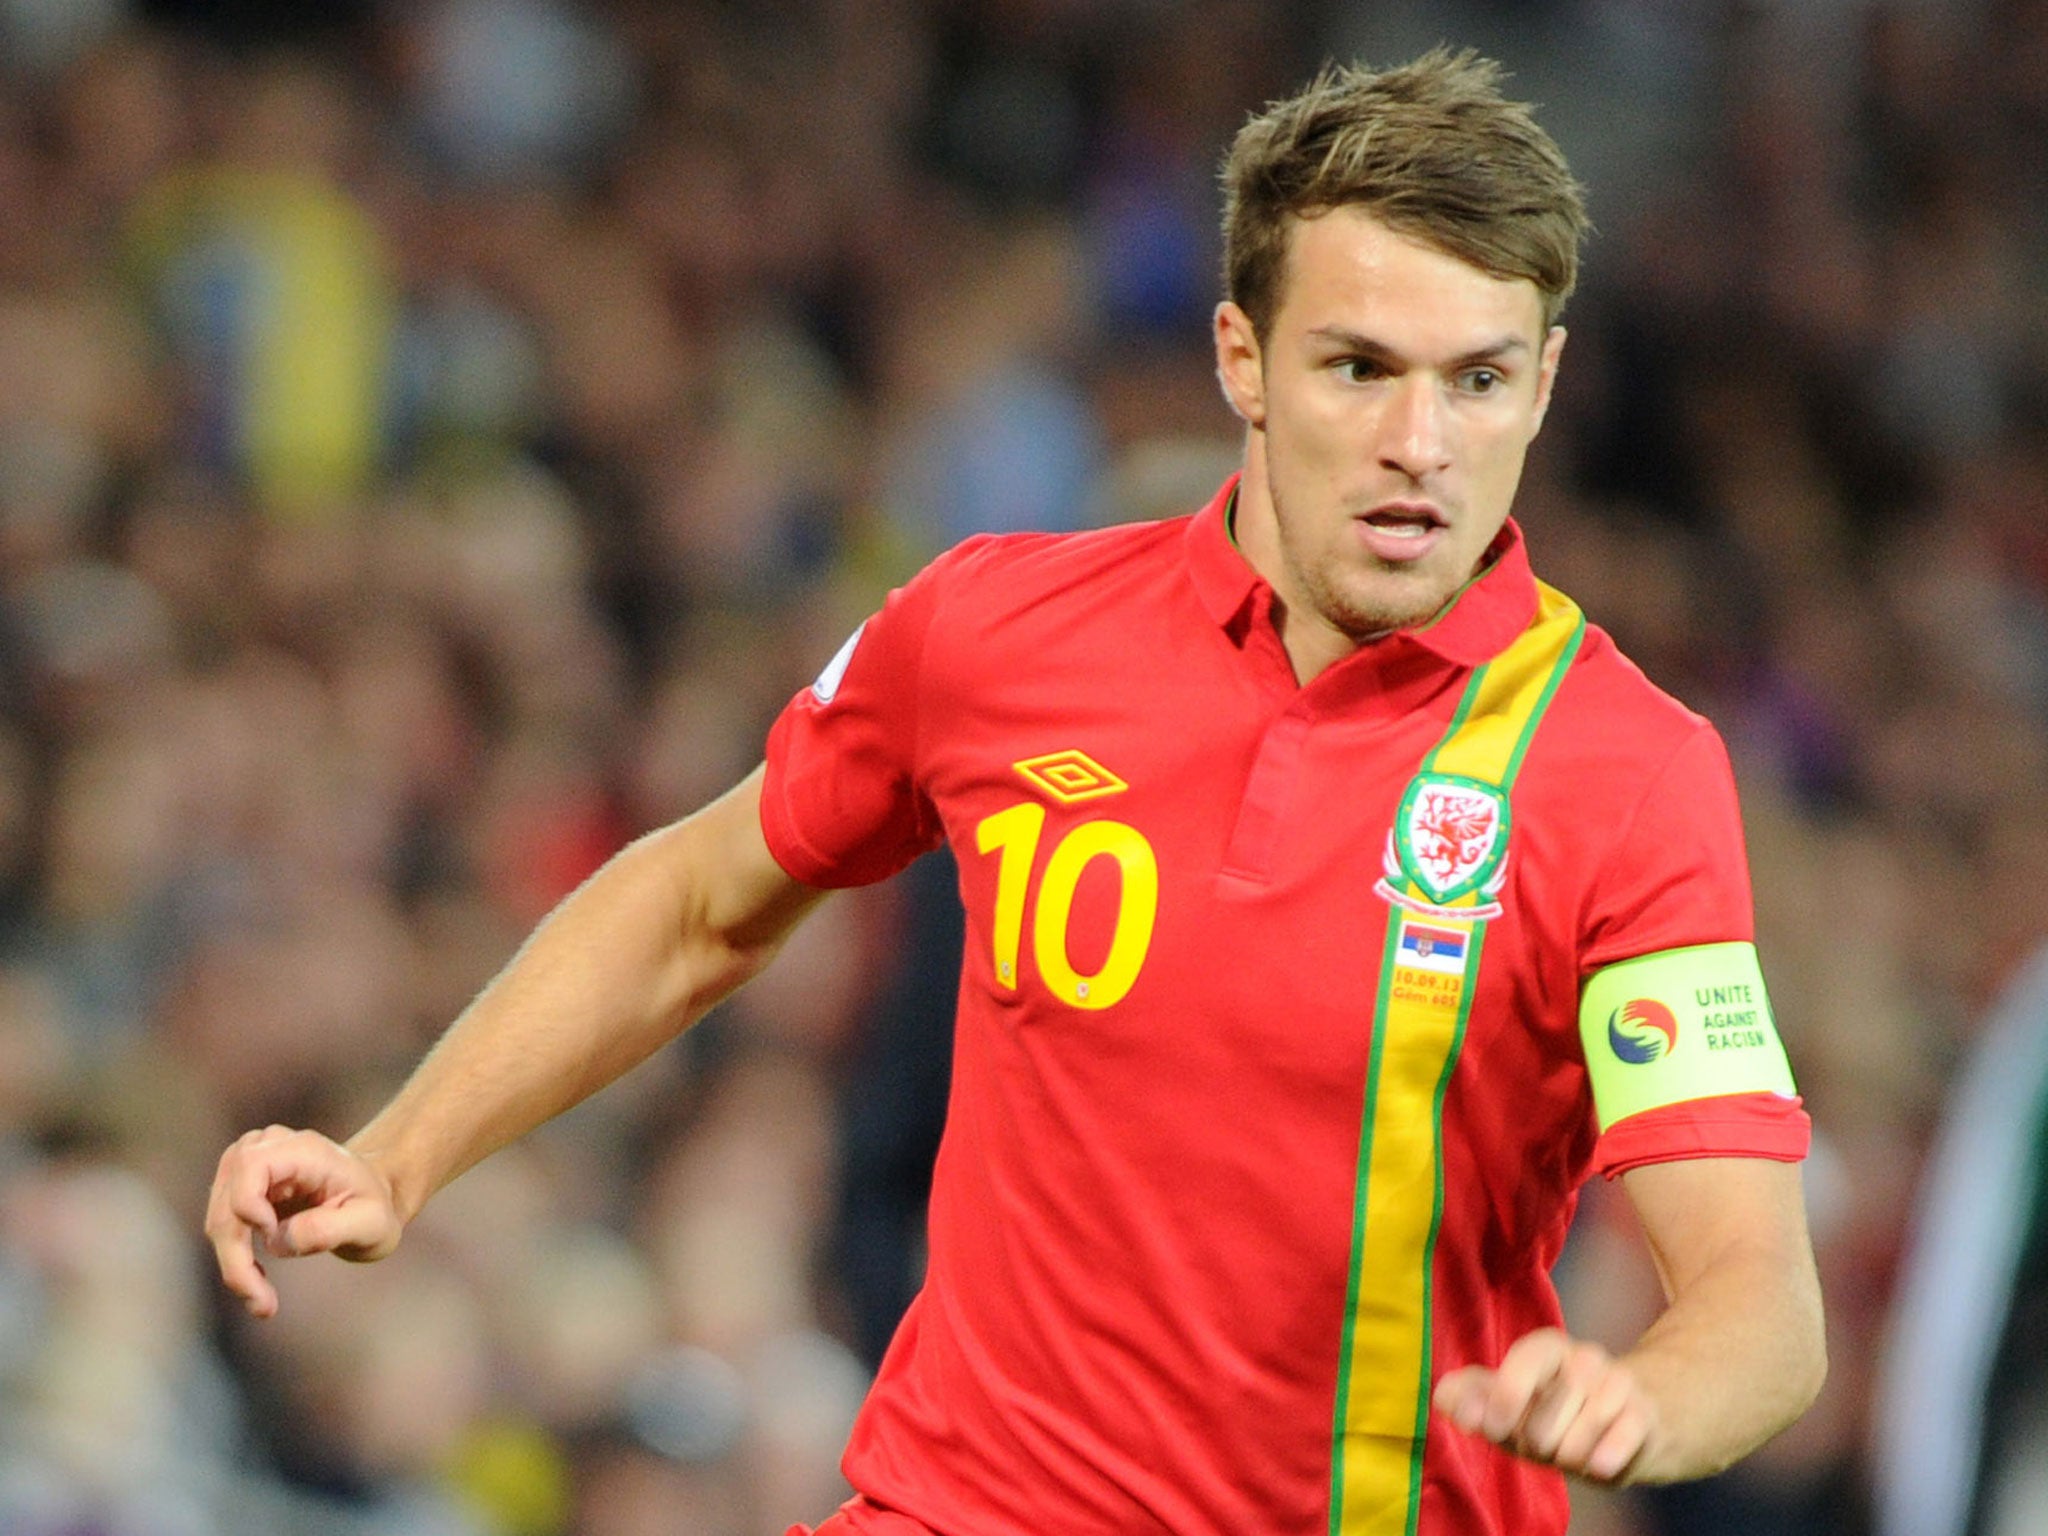 Aaron Ramsey will lead the line for Wales against Macedonia